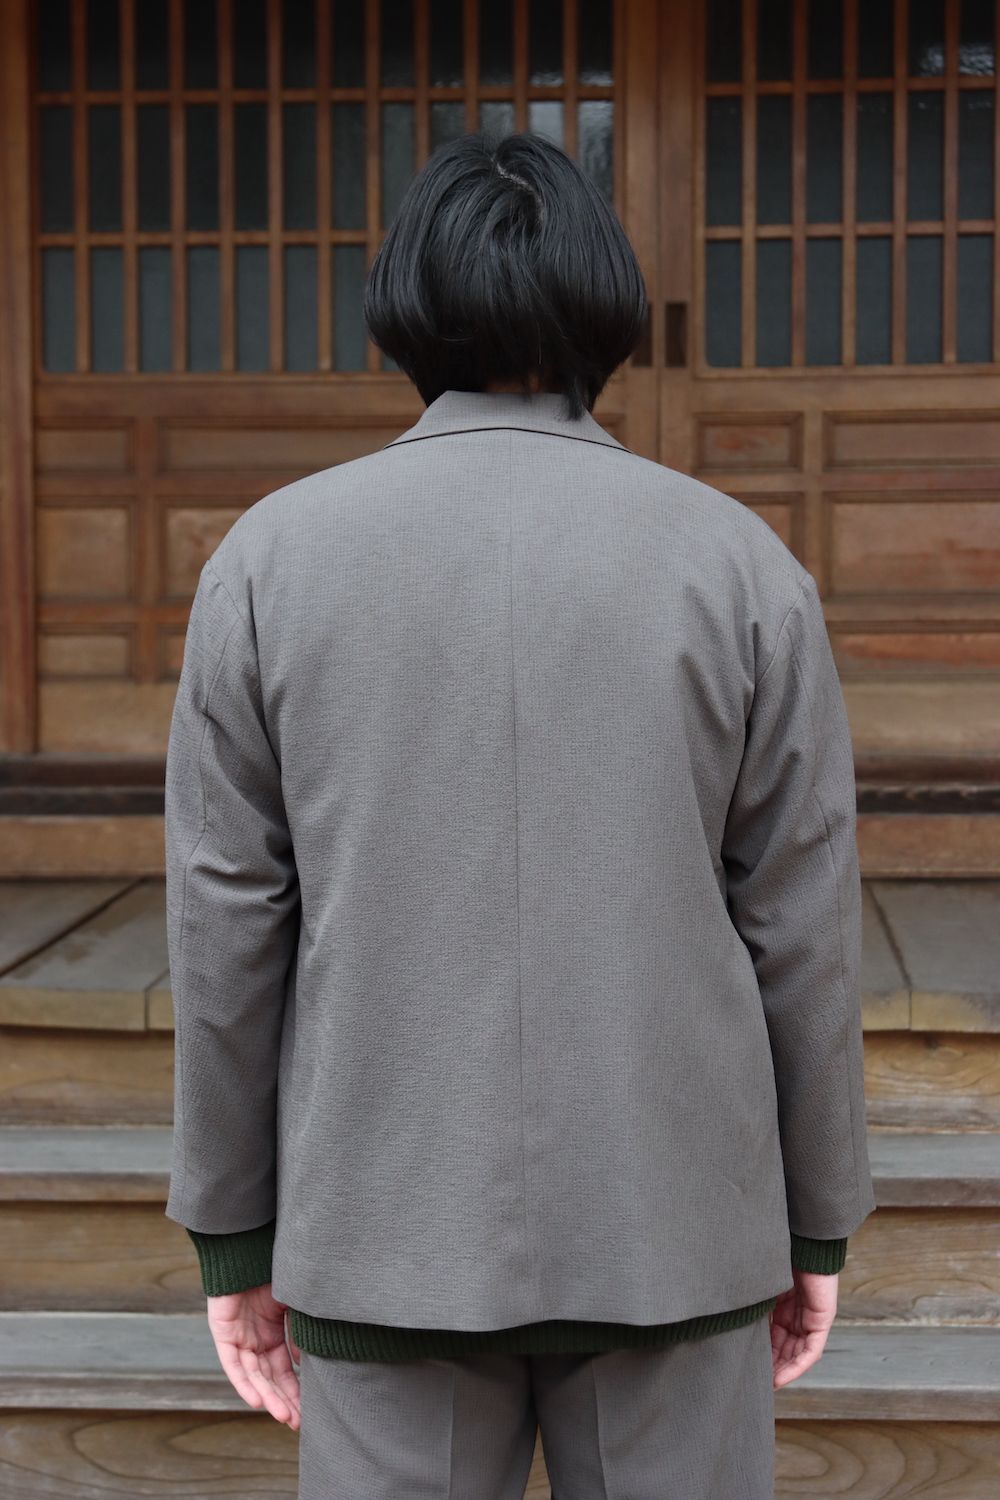 UNIVERSAL PRODUCTS CREPE UNCONSTRUCTED 2B JACKET style.2022.1.30 